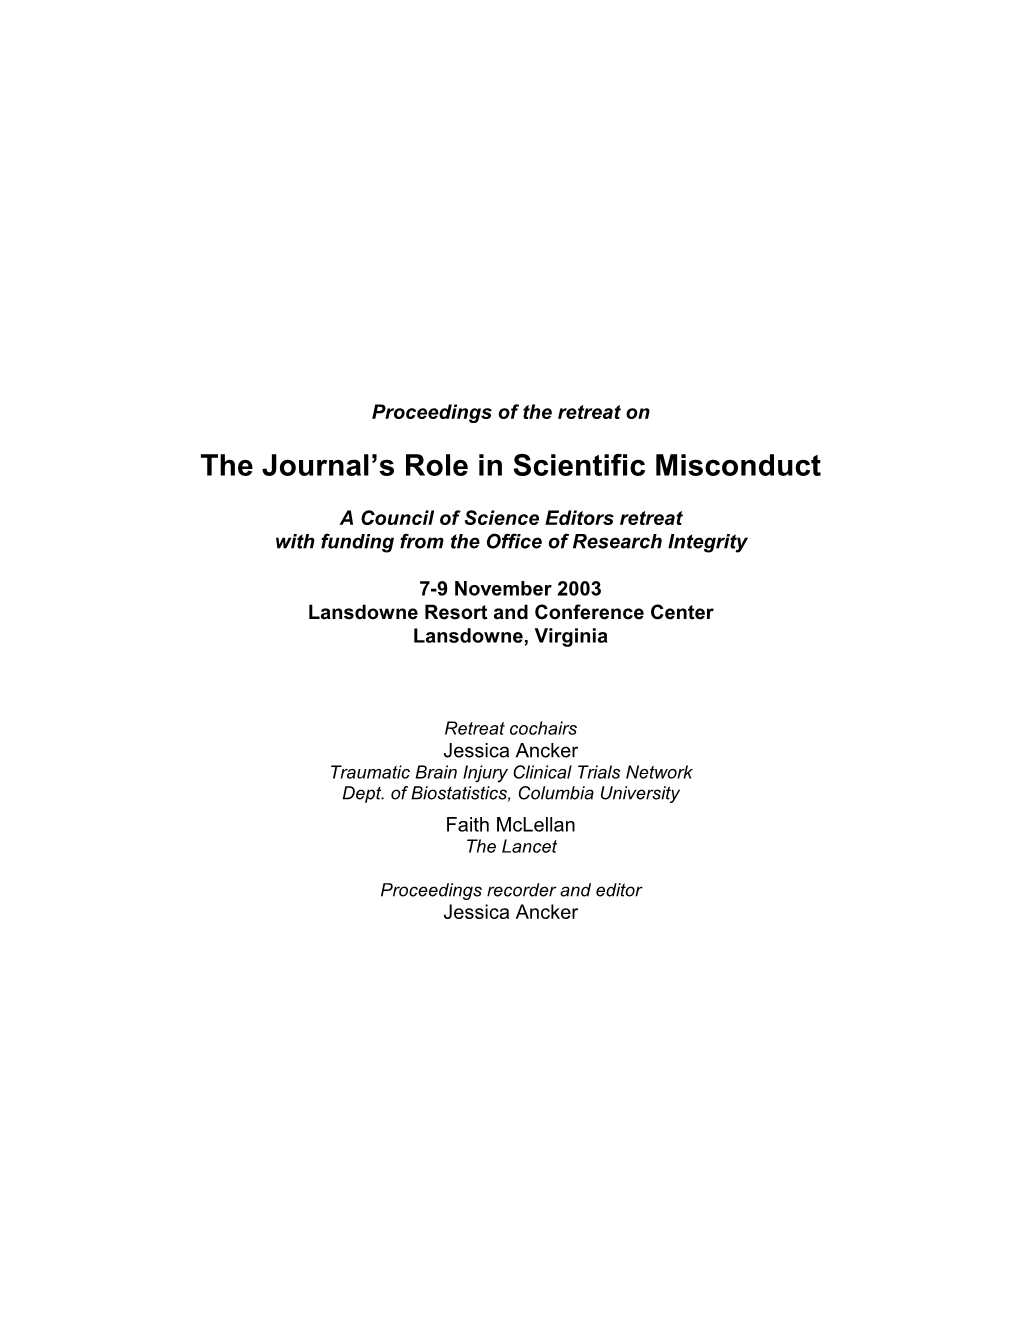 The Journal's Role in Scientific Misconduct